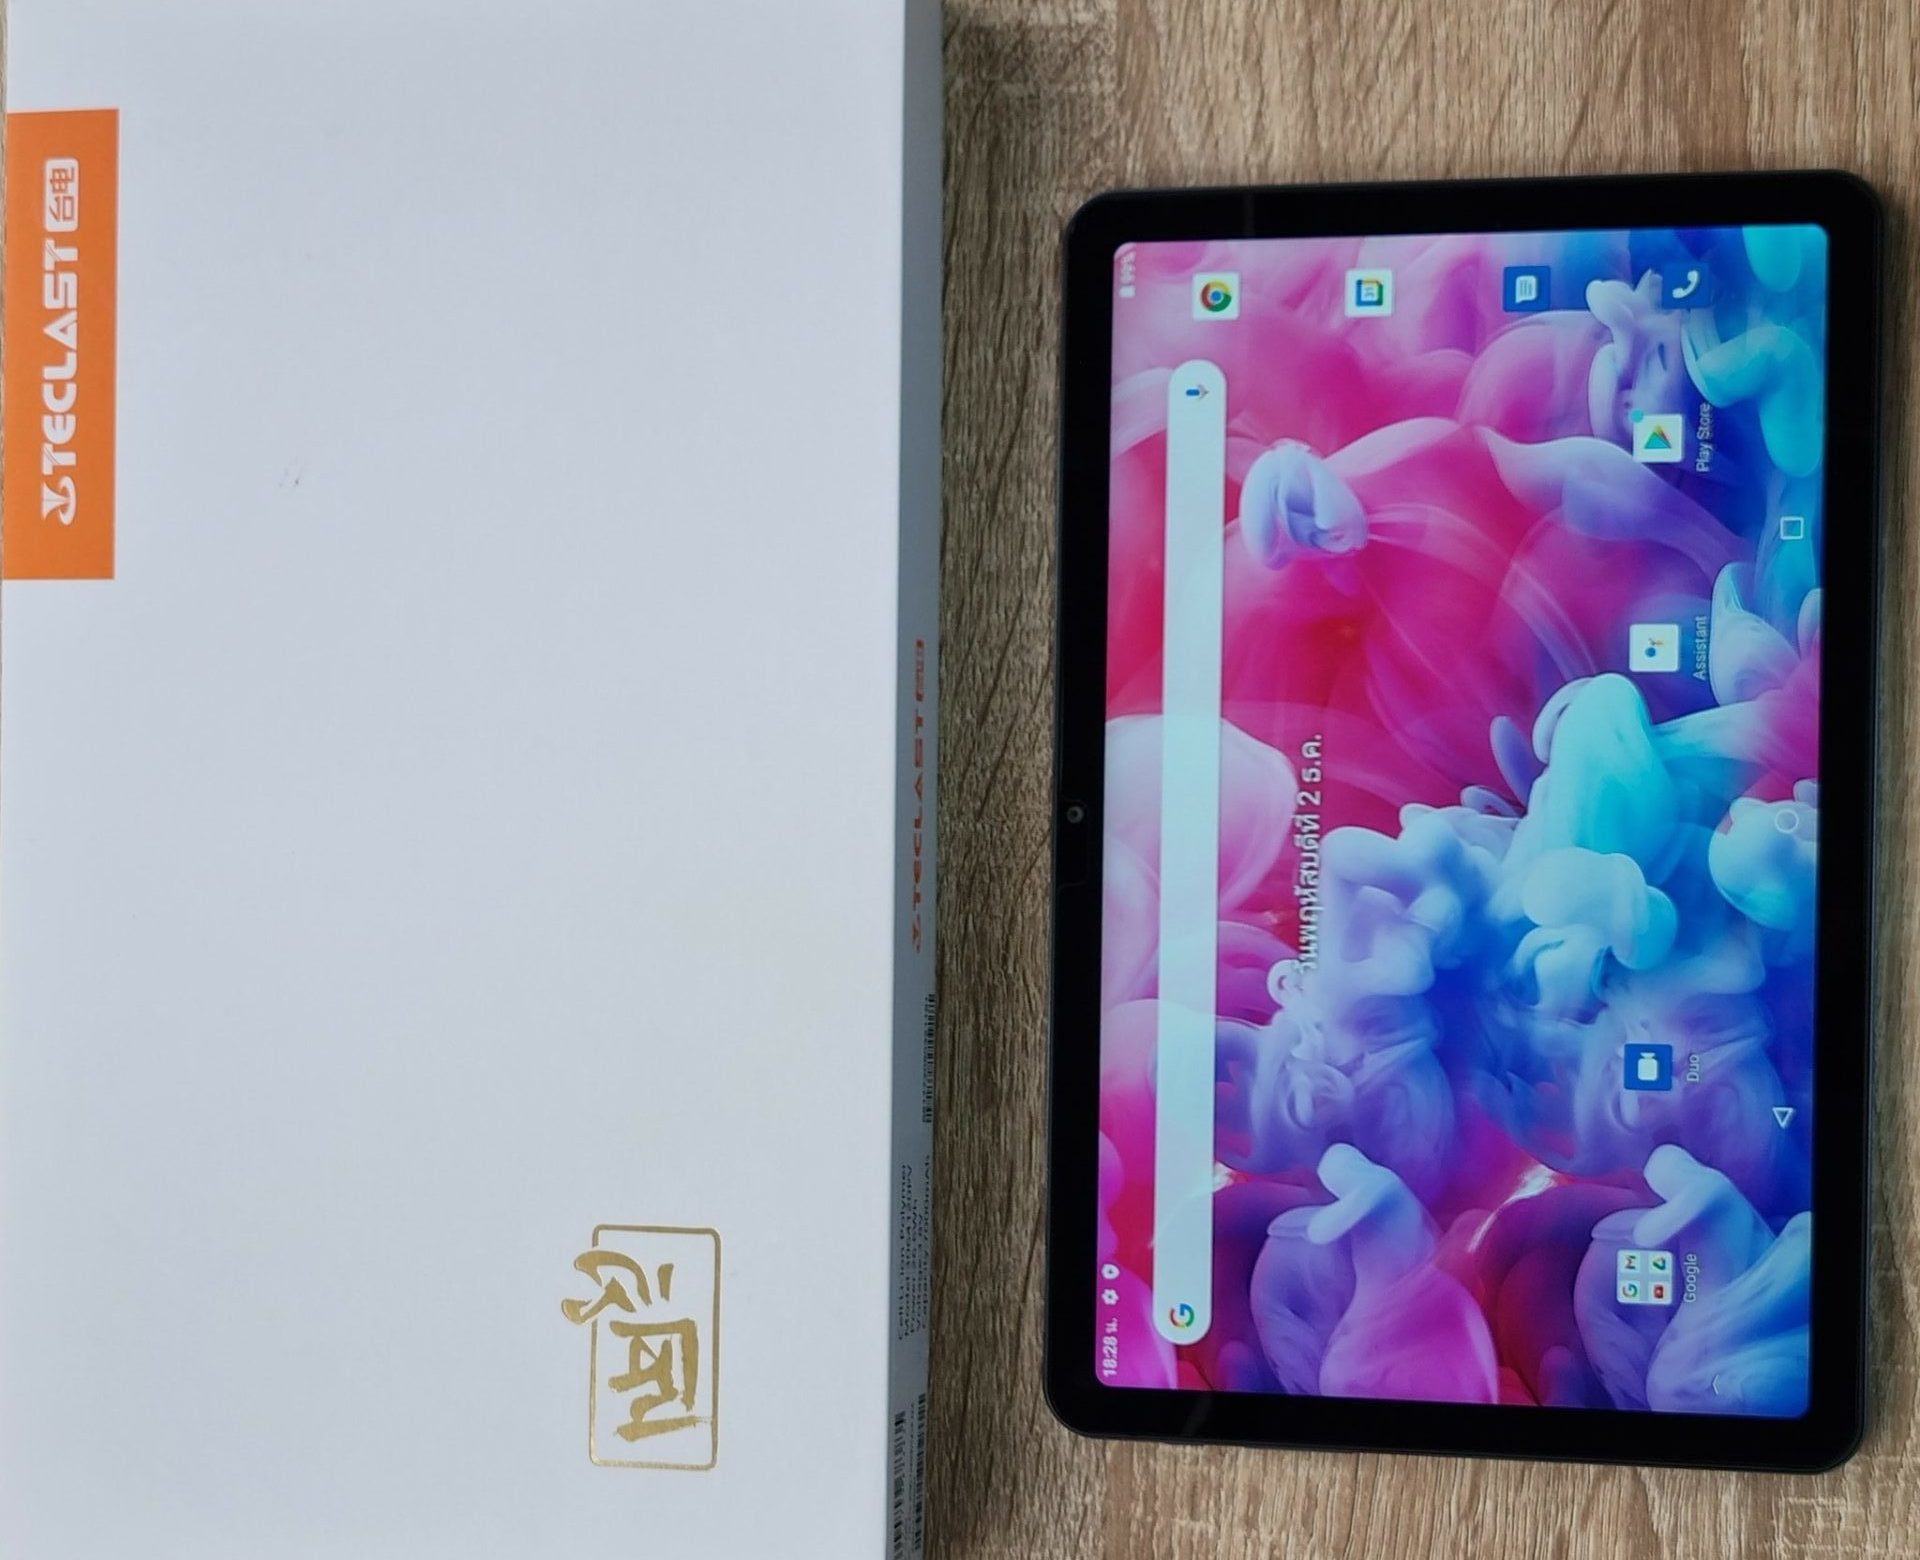 Teclast T40 Pro review - Affordable tablet with LTE